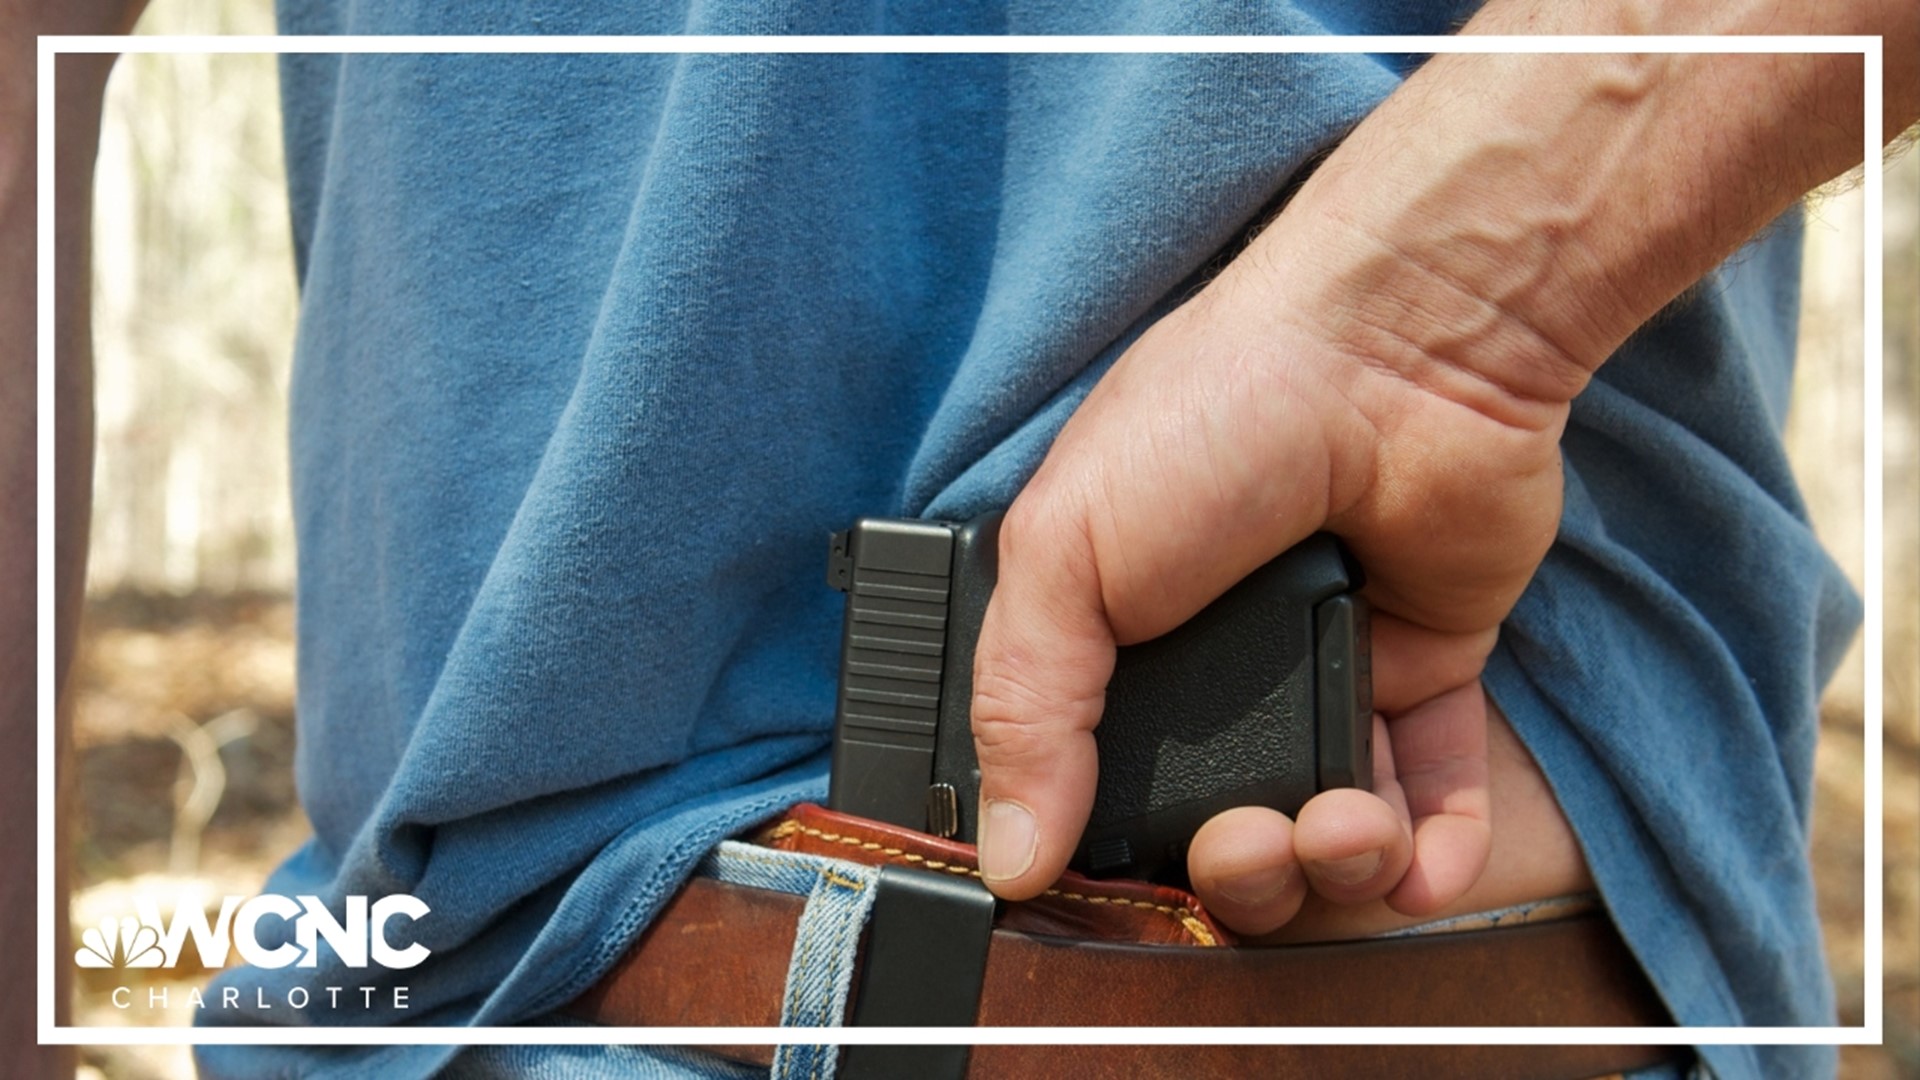 Dozens of new laws are taking effect in North Carolina on December 1, including changes to the concealed carry permits and election laws.